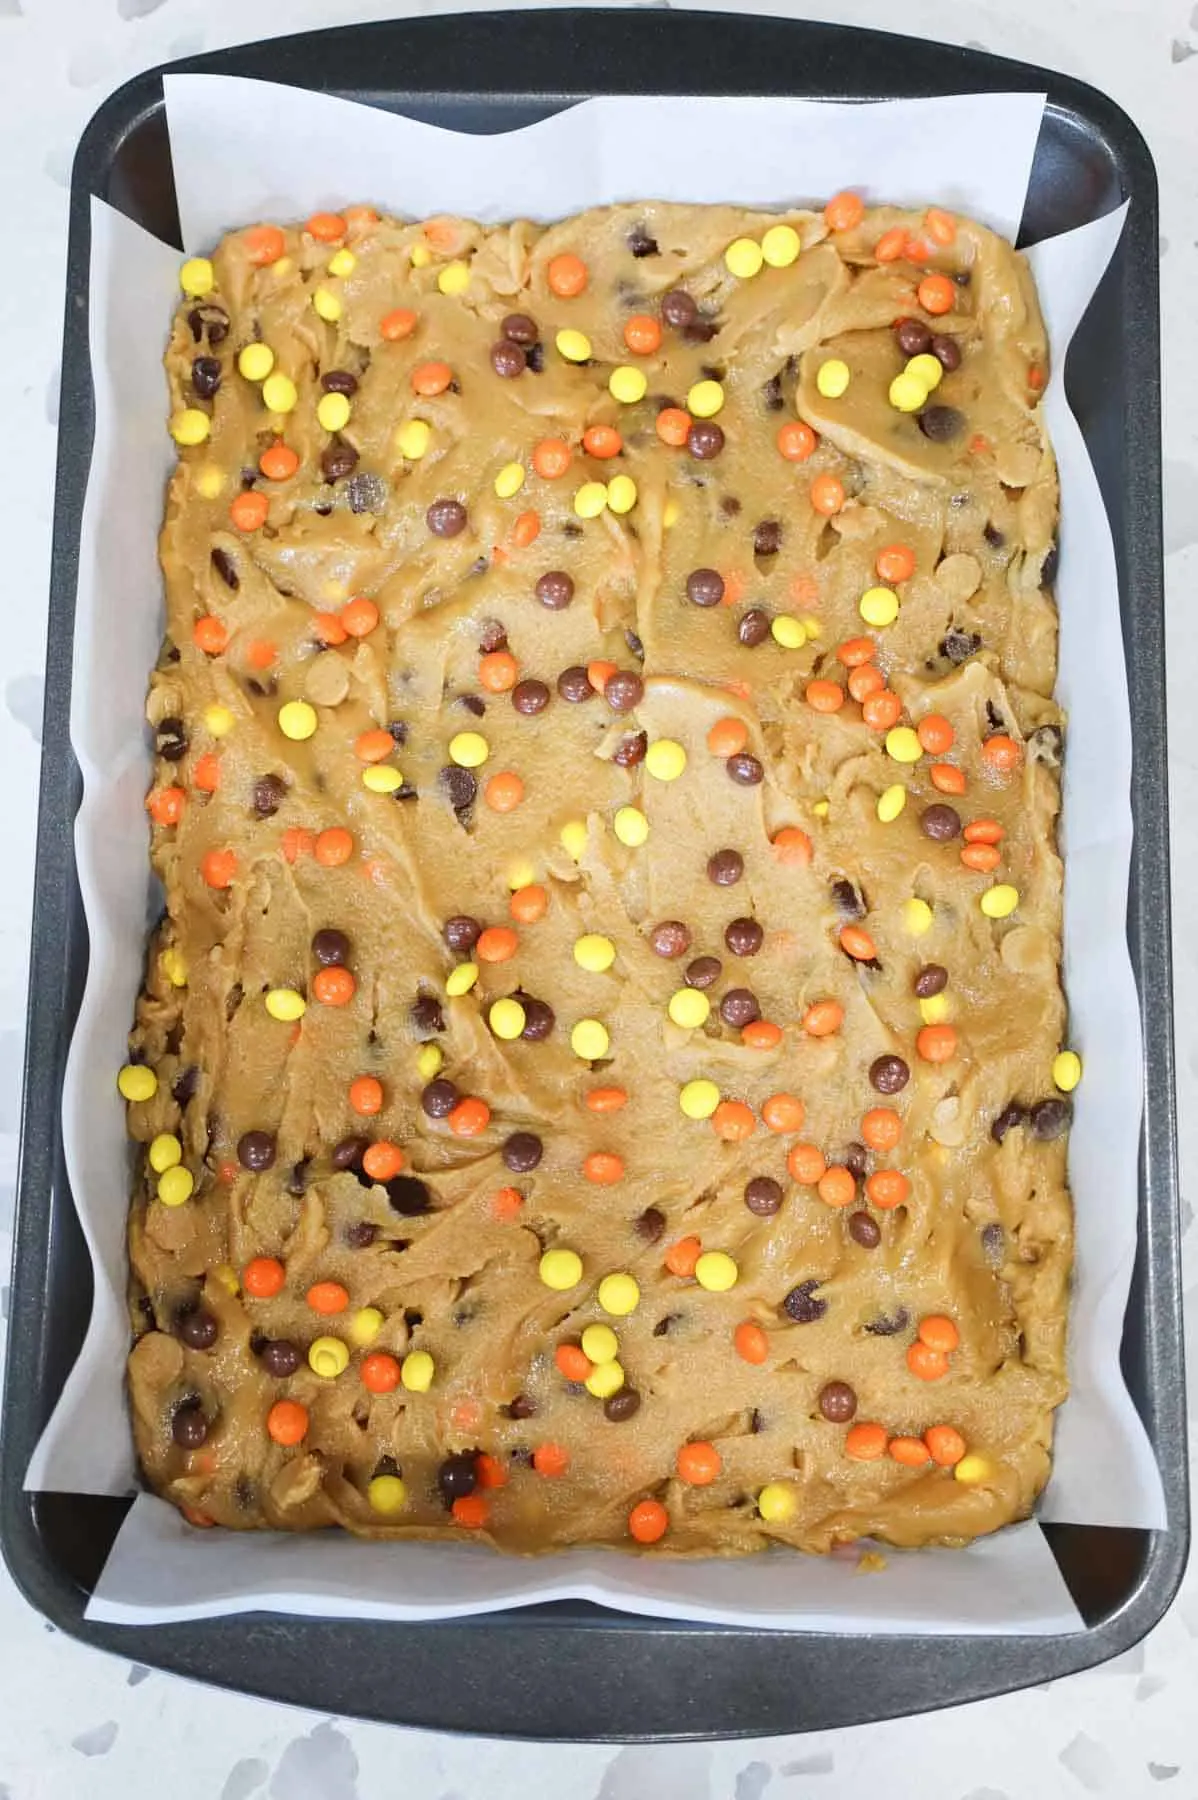 mini Reese's pieces candies on top of peanut butter blondie batter in a baking pan